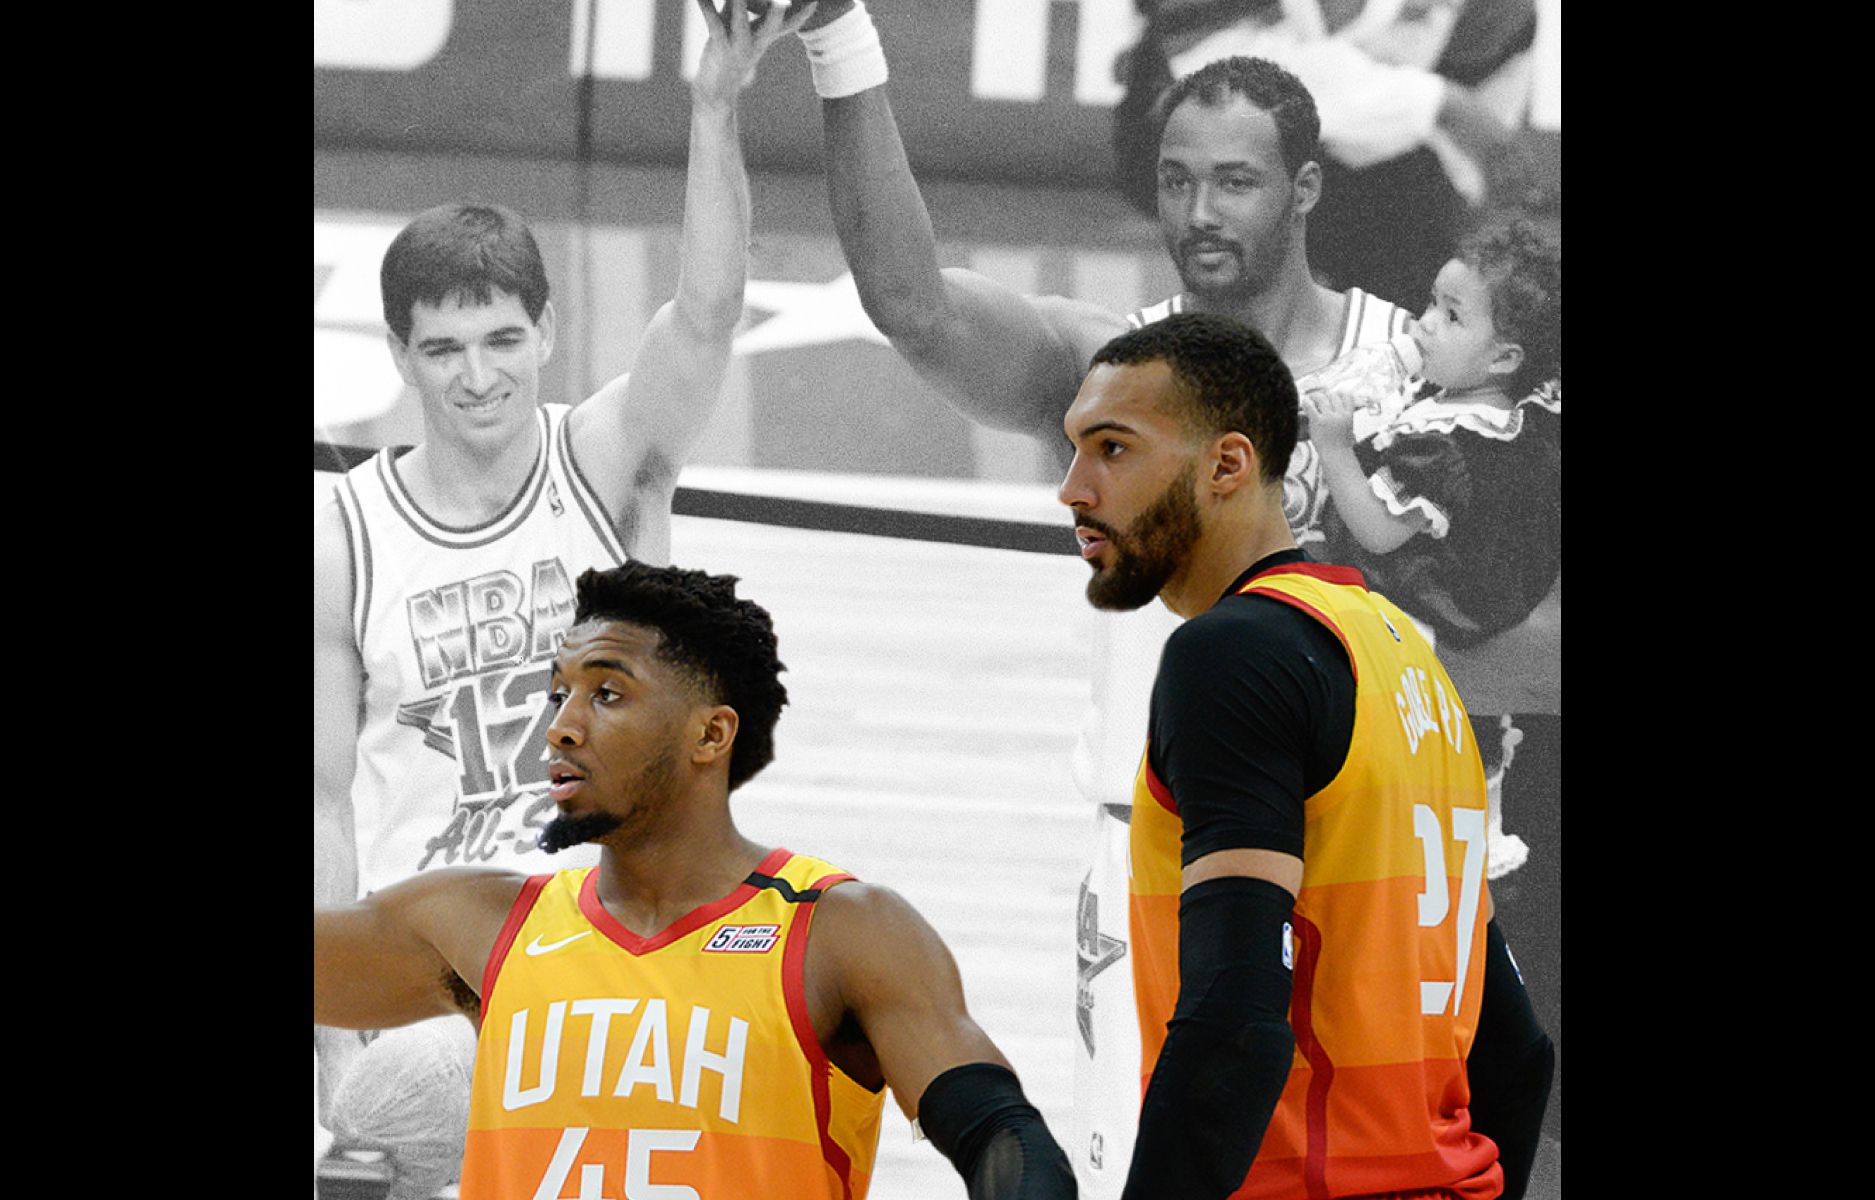 Karl Malone happy to see Donovan Mitchell in his old Jazz jersey